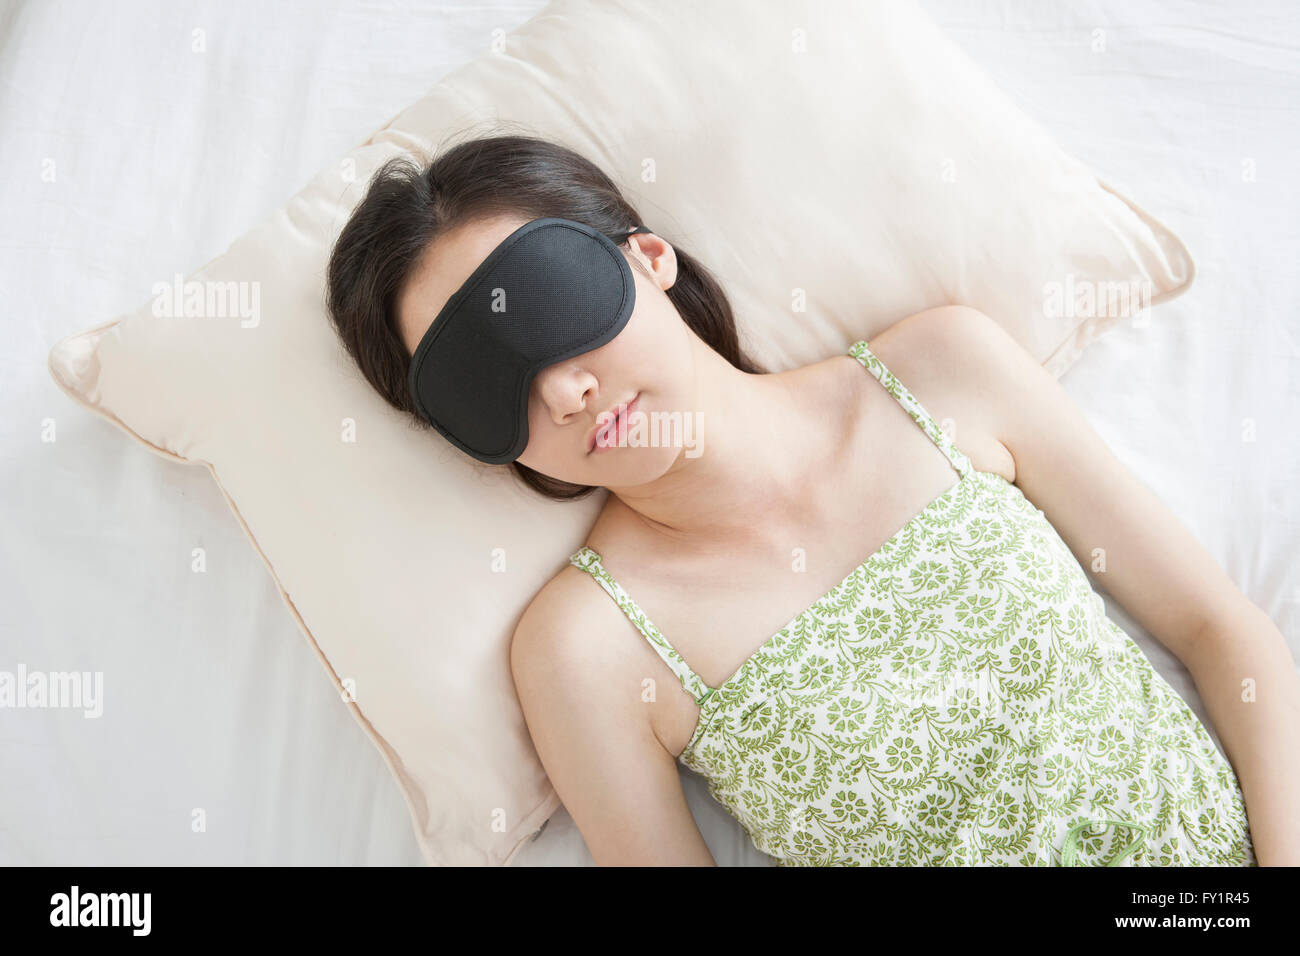 Hifh angle portrait of young woman lying down with a sleep shade Stock Photo